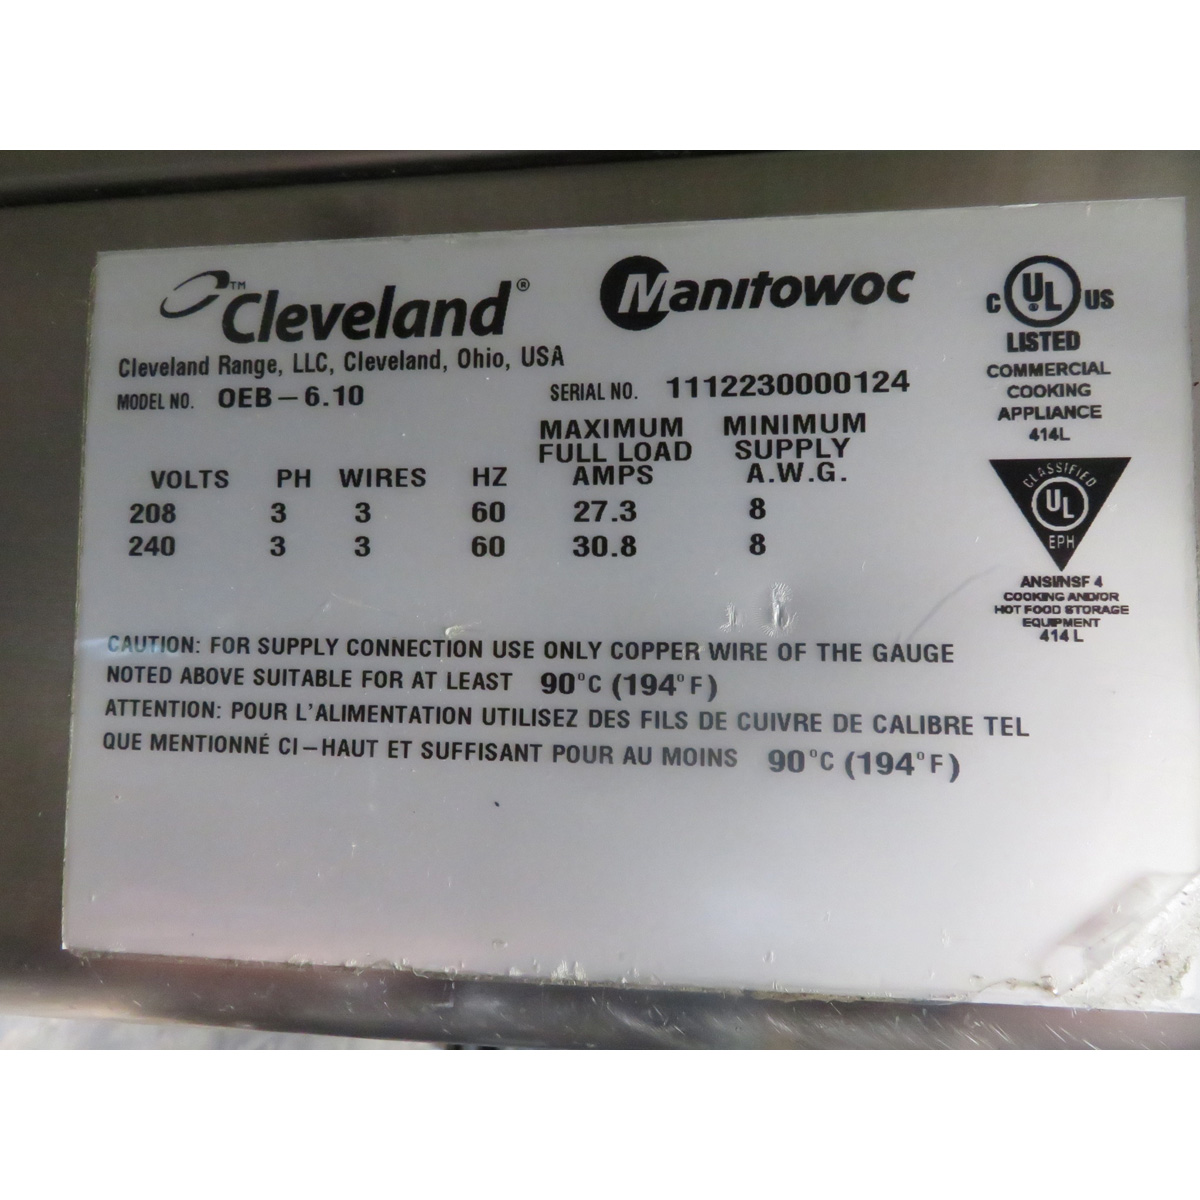 Cleveland Convotherm OEB-6.10 Electric Combi Oven, Used Excellent Condition image 7